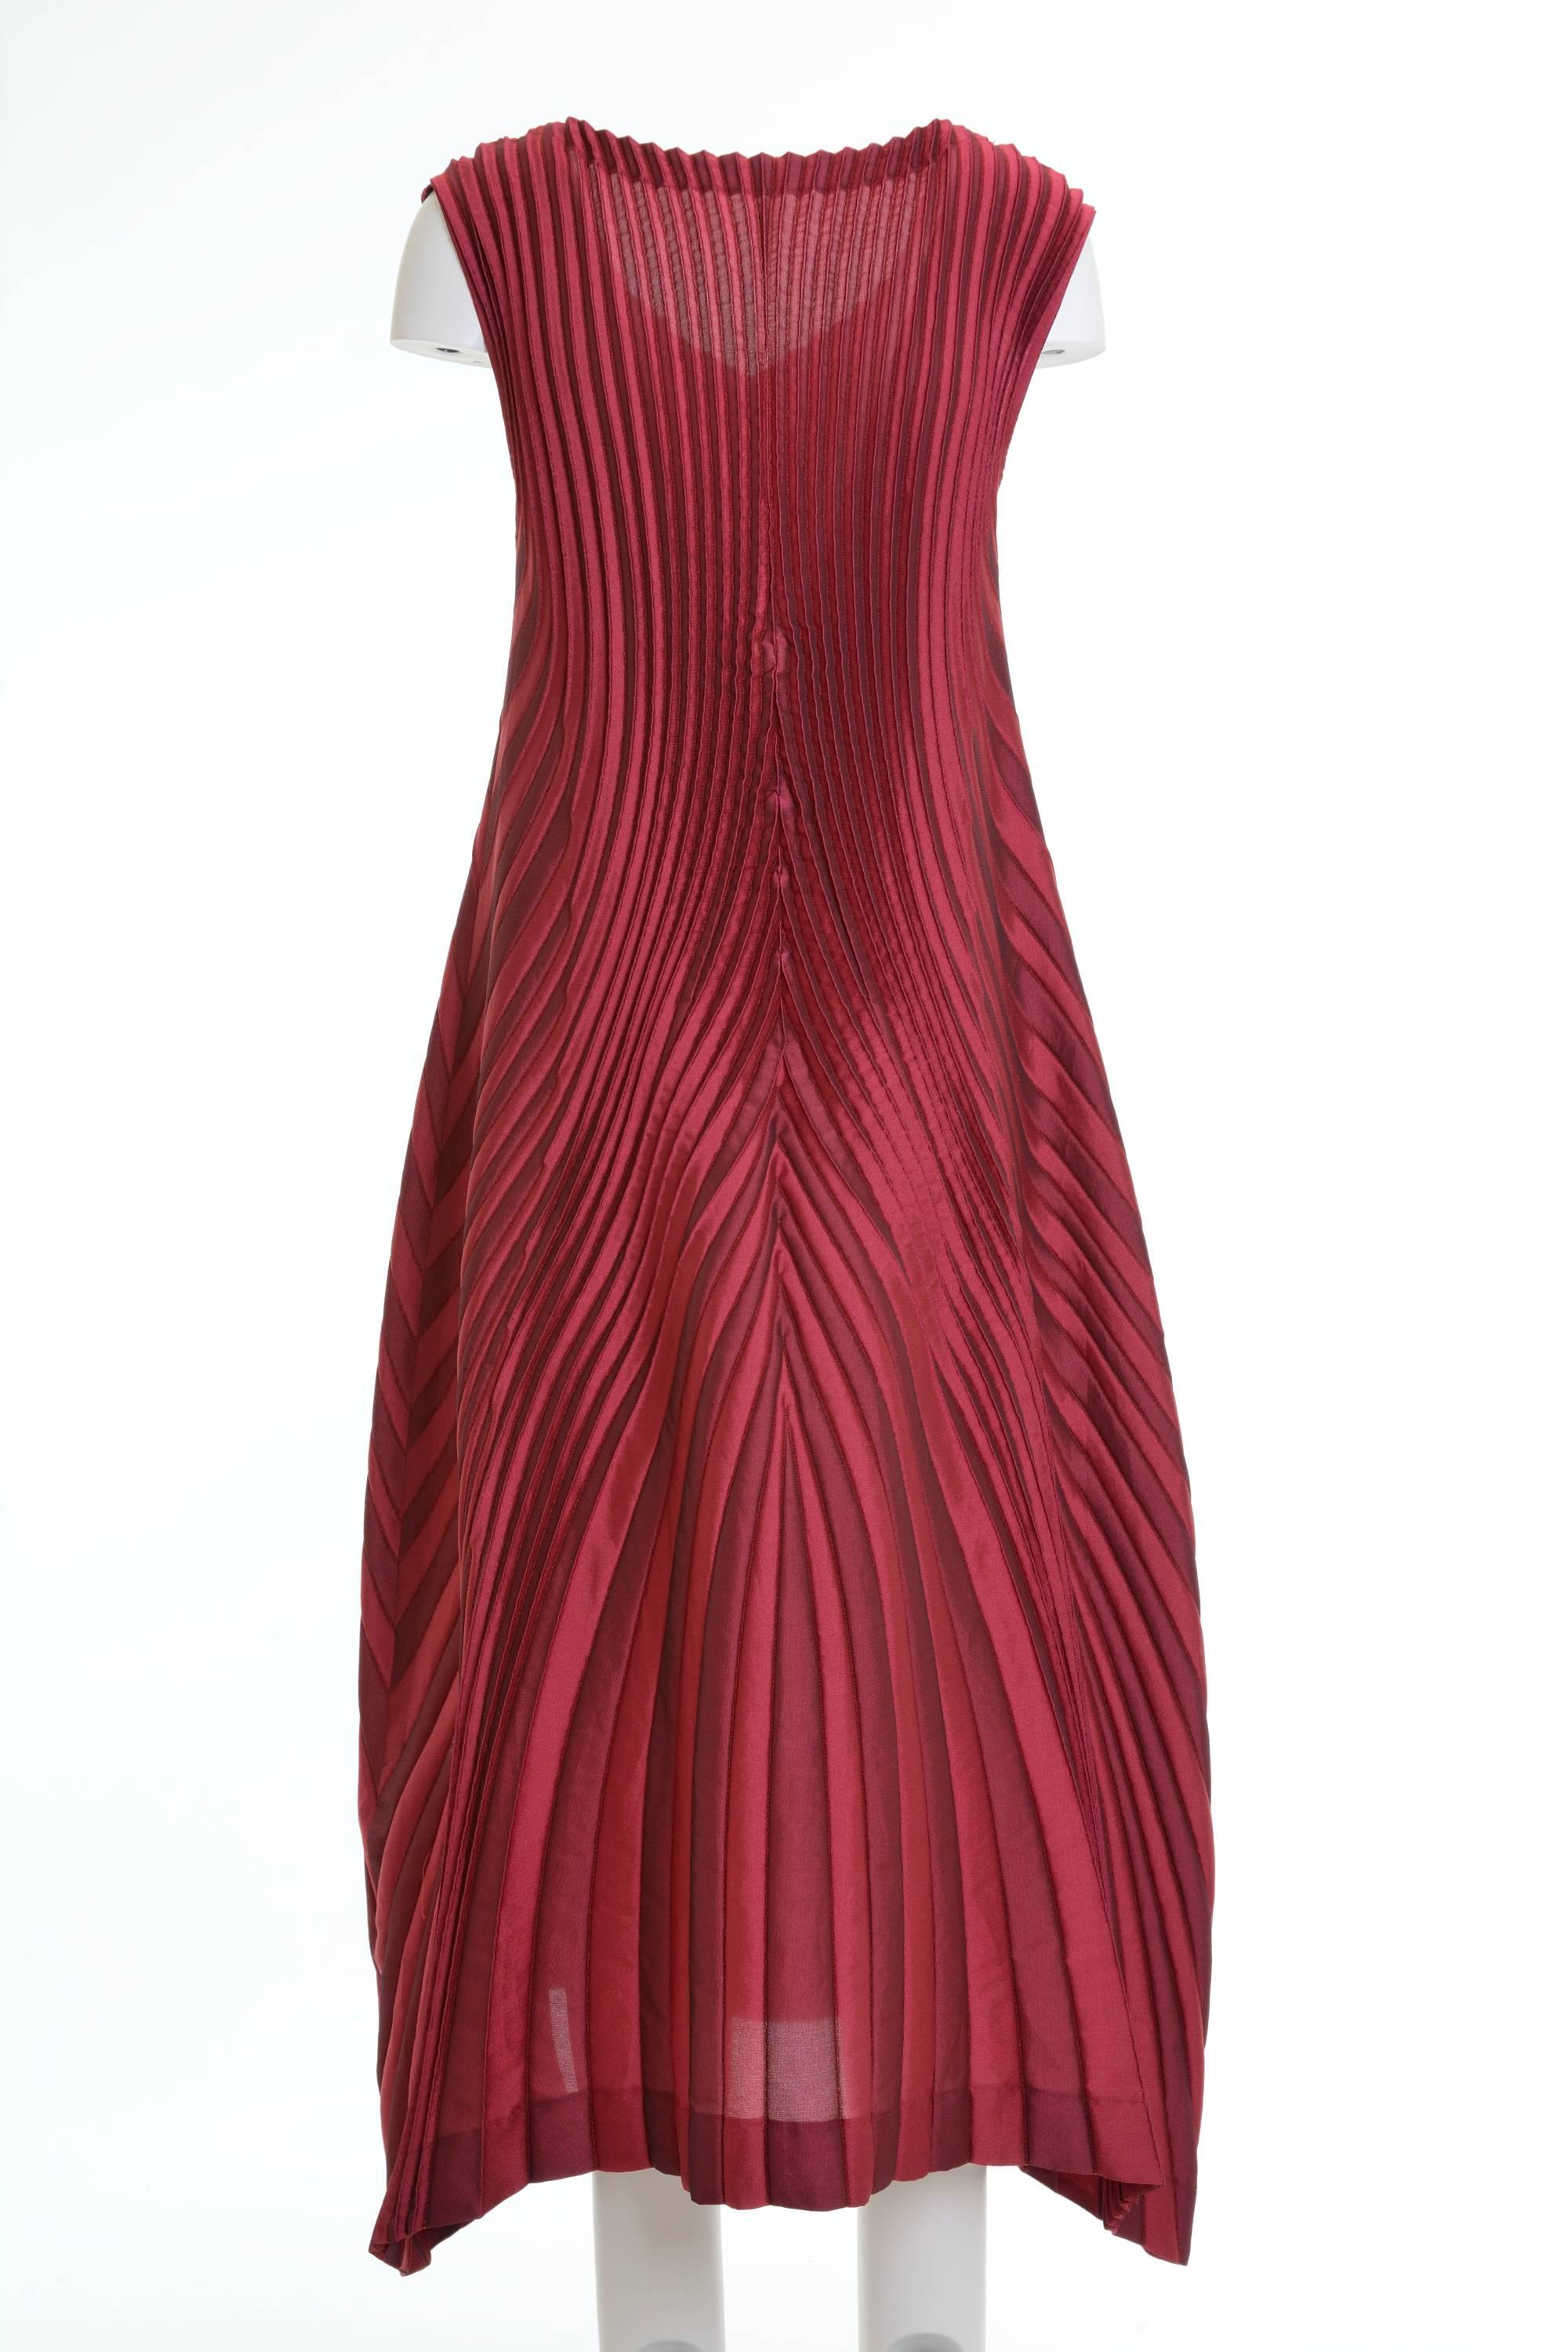 Issey Miyake sleeveless A-line dress, pleated fabric, V-Line neck, the dress is longer on the sides, made in Japan.

Excellent Condition 

Label: Issey Miyake
Colour: bordeaux/pink
Fabric: Polyester/Triacetate/Polyurethane

Measurements:
label size: